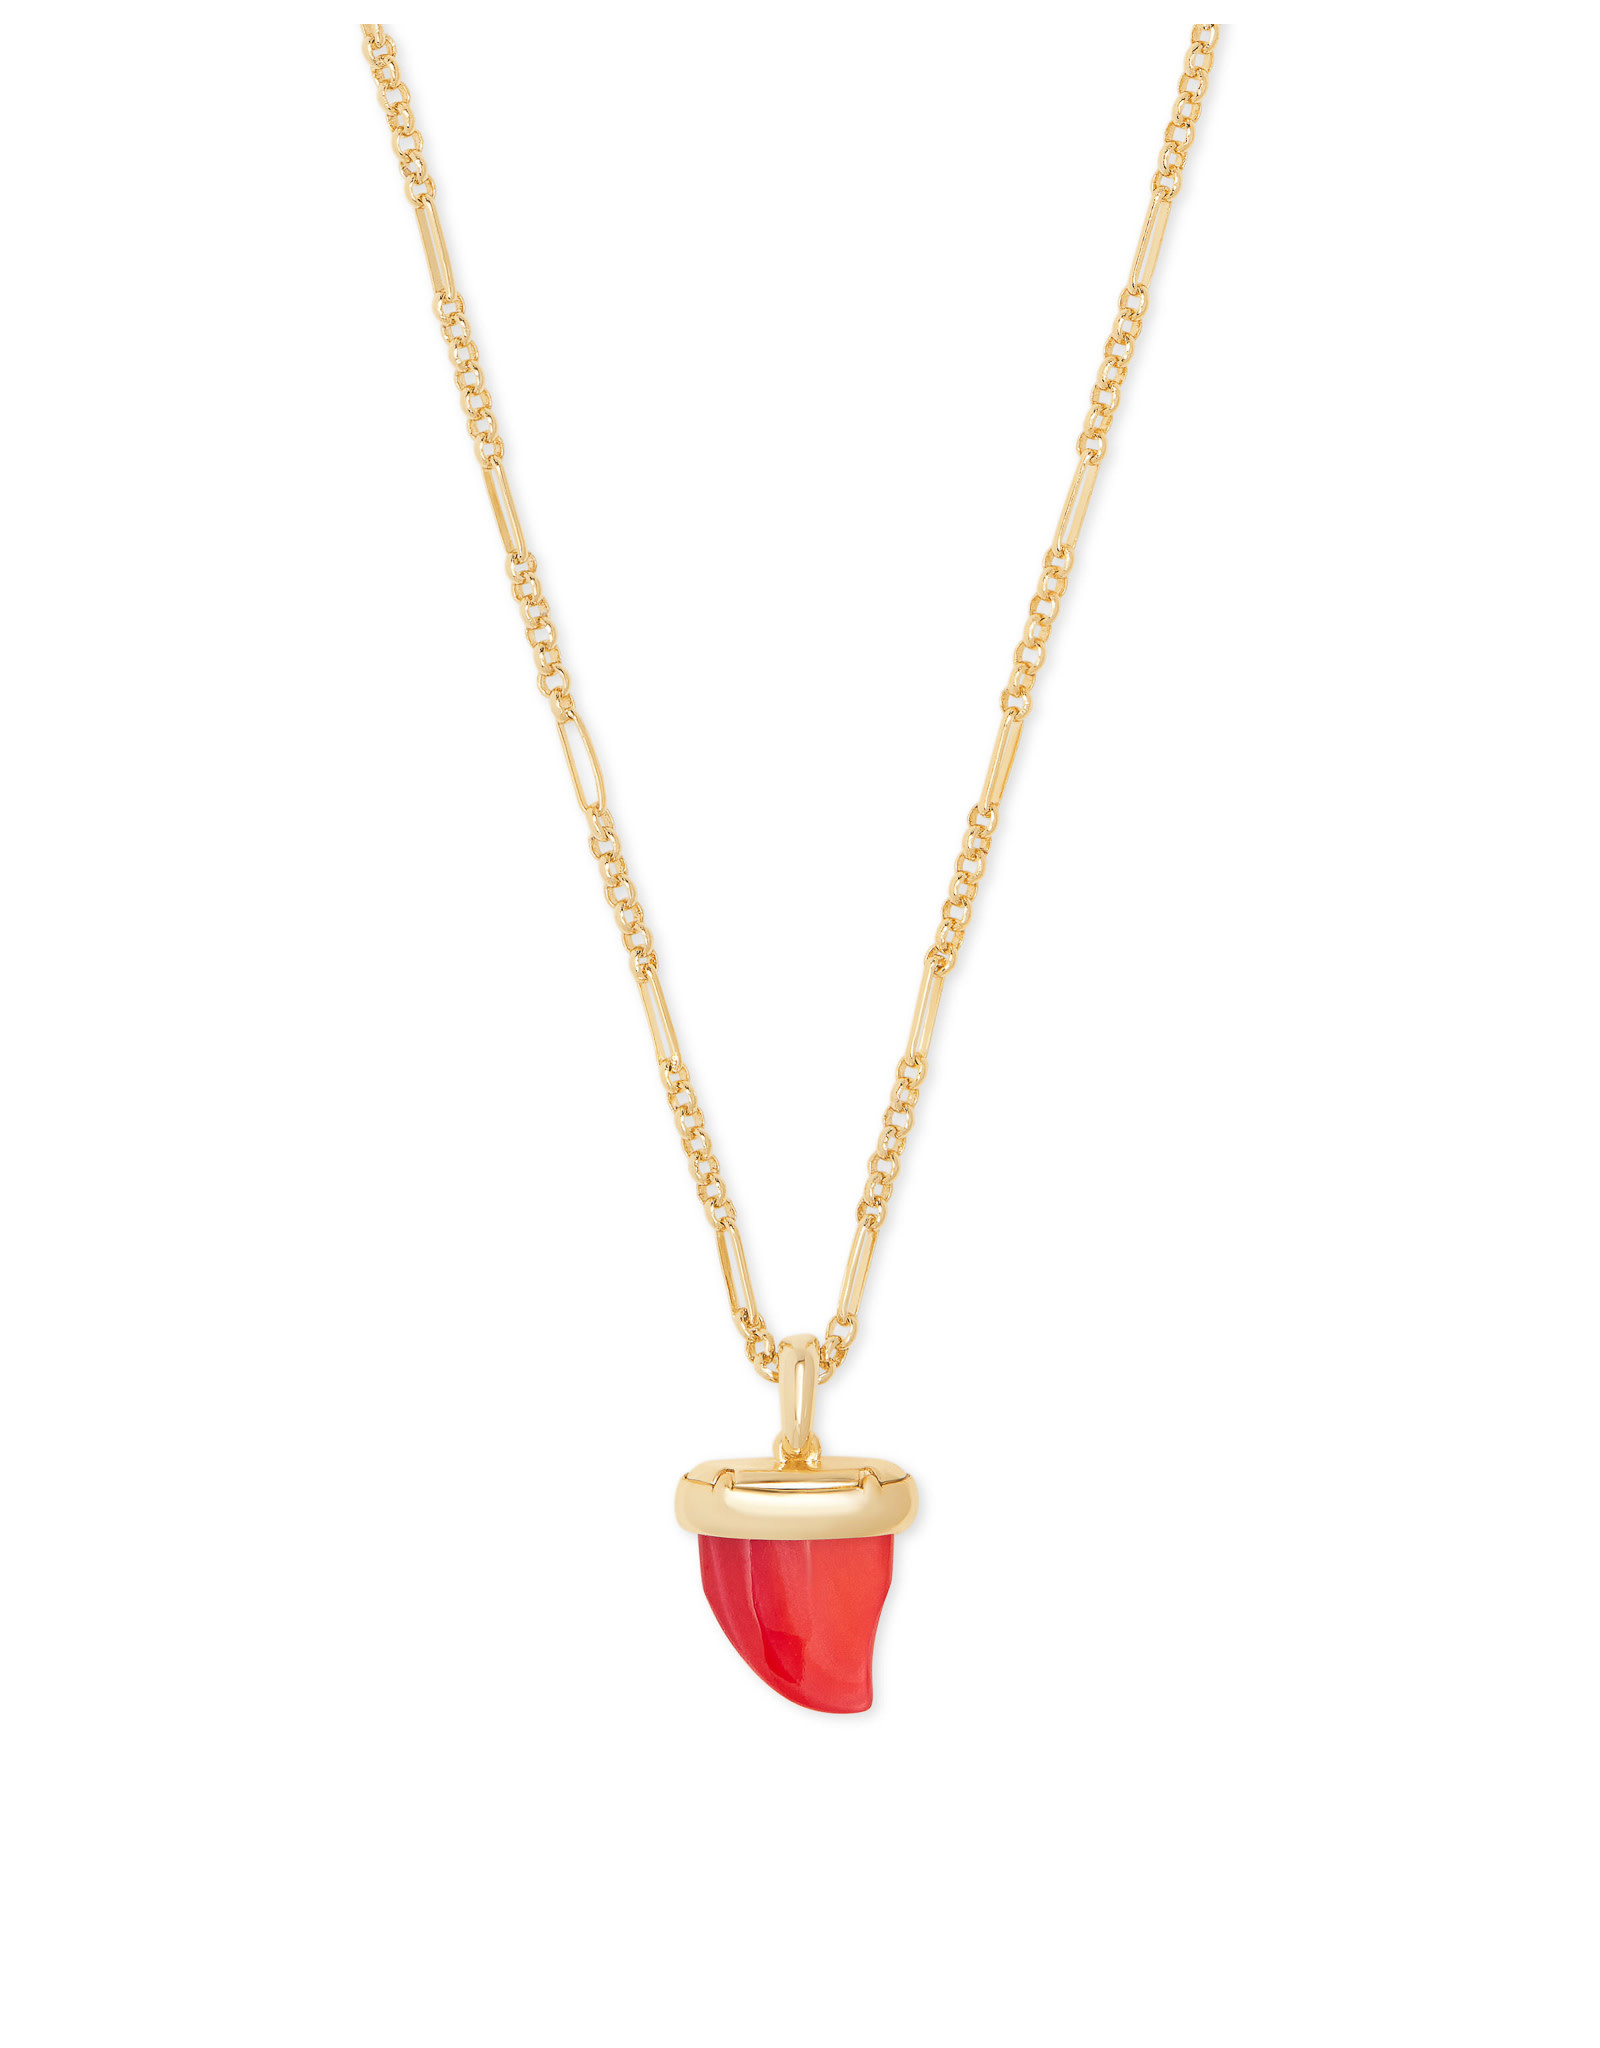 Kendra Scott Oleana Pendant Necklace Gold Red Pearl